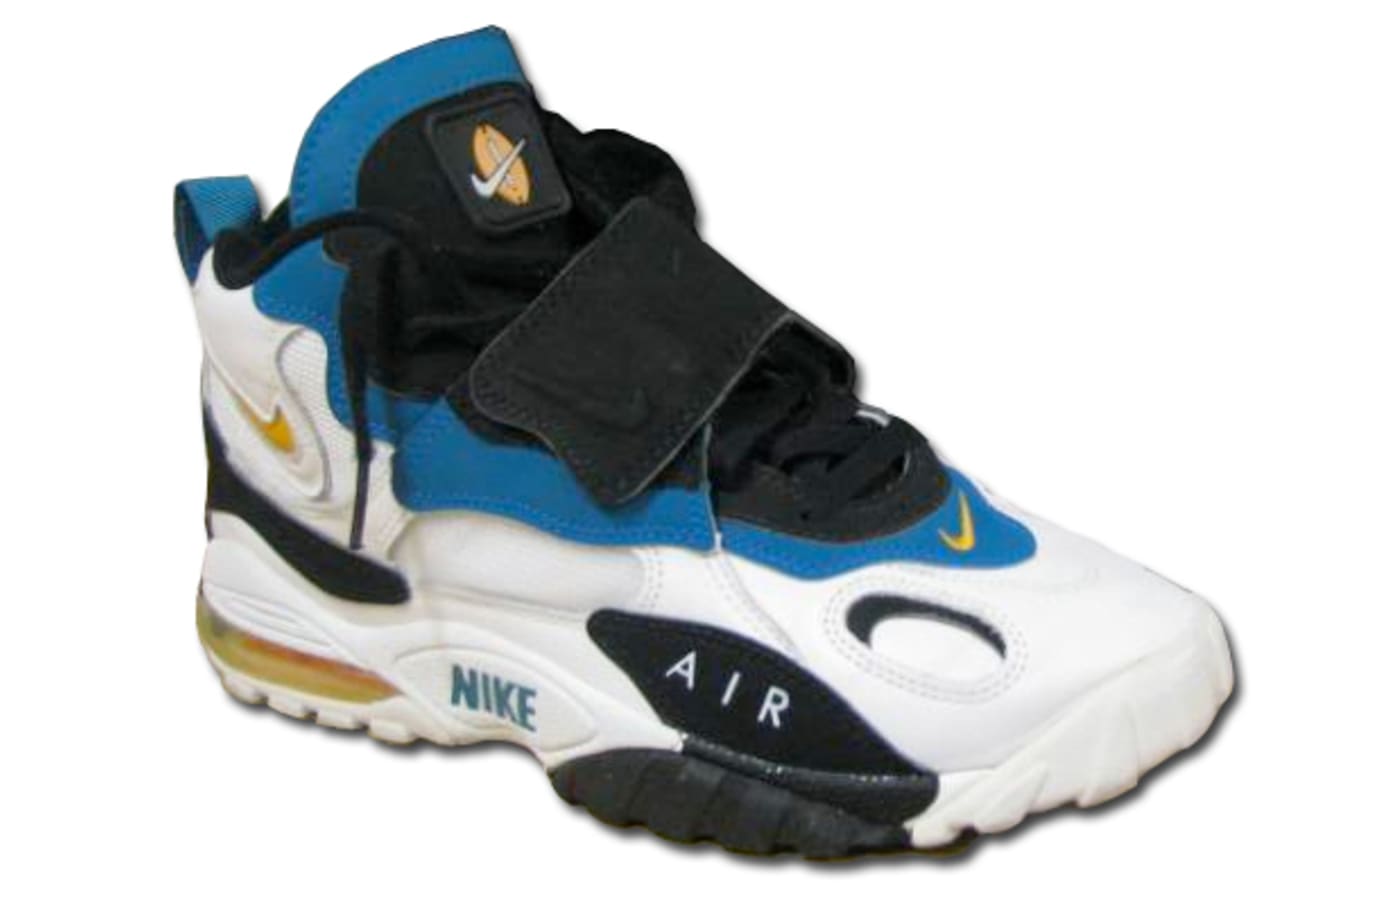 The 25 Air Max Sneakers Of All-Time